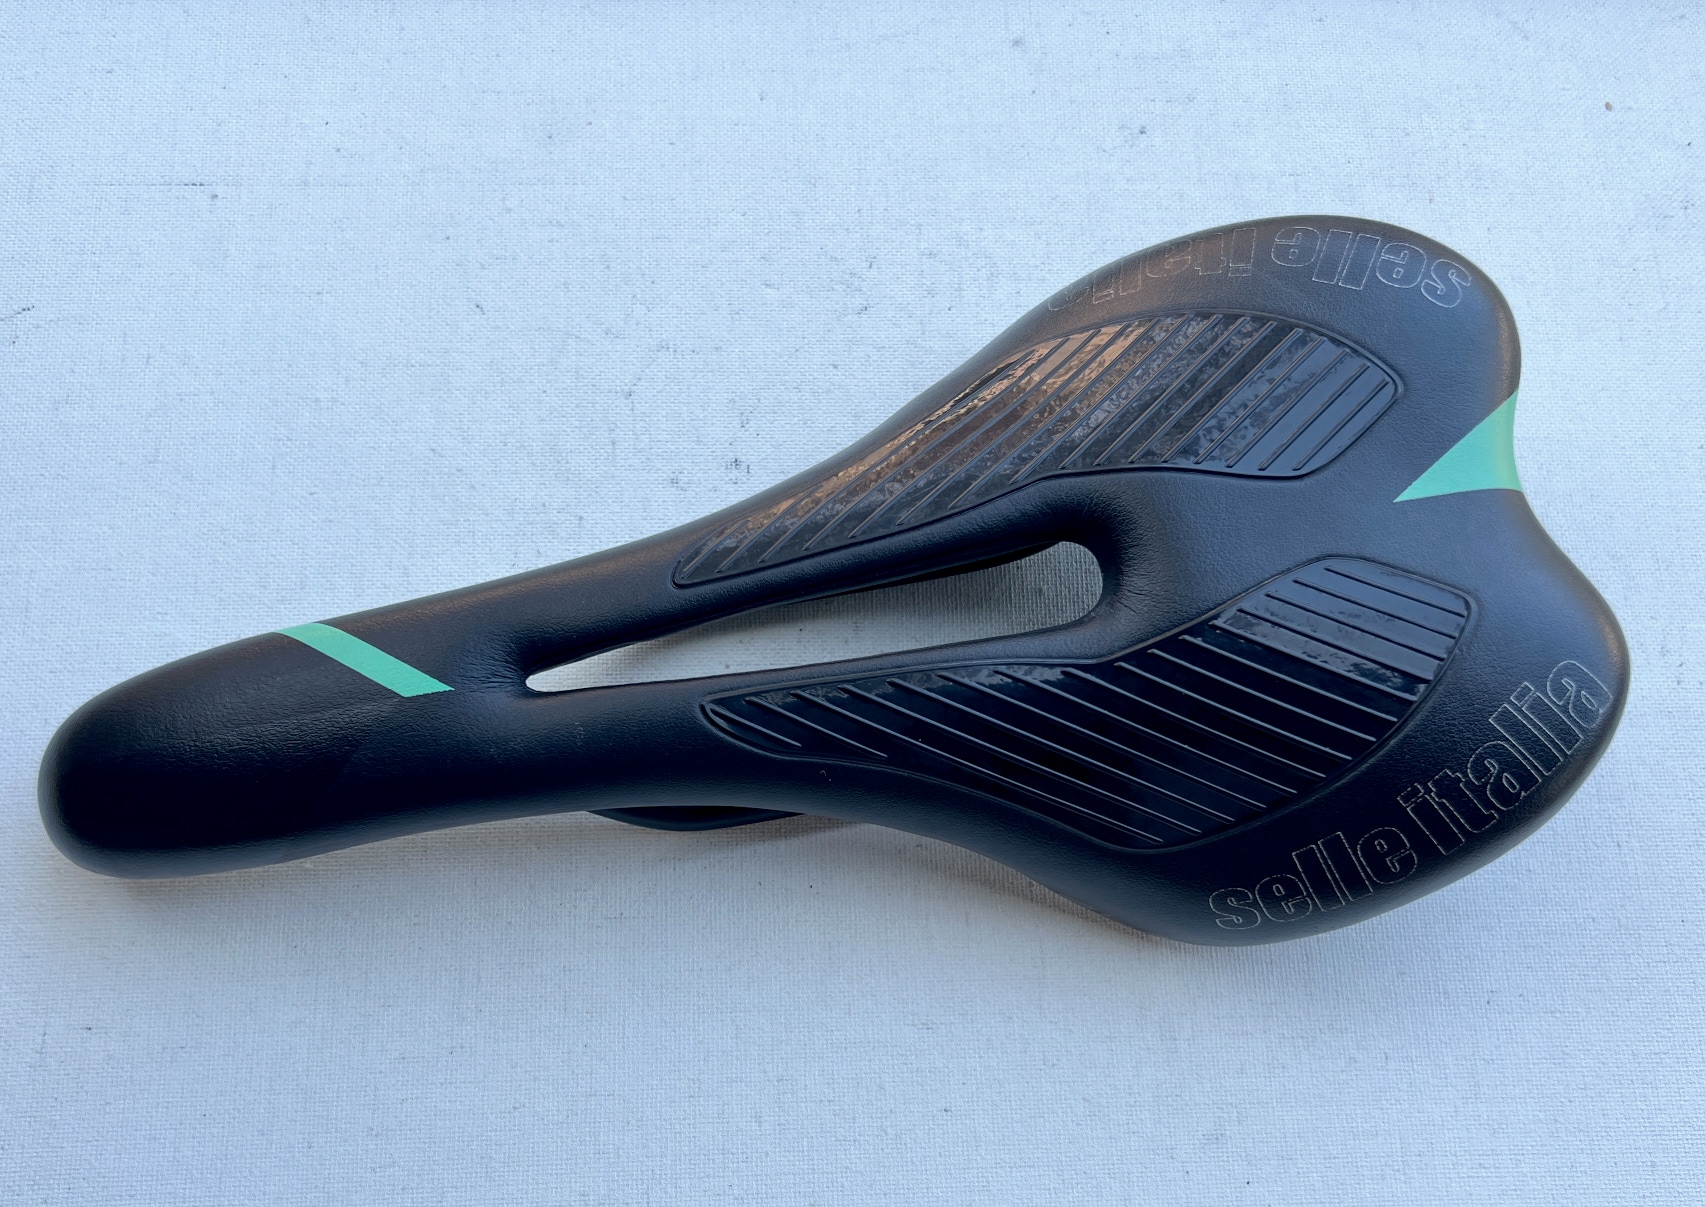 Selle Italia Carbon Road Bicycle Saddle Black with Bianchi Celeste Accents